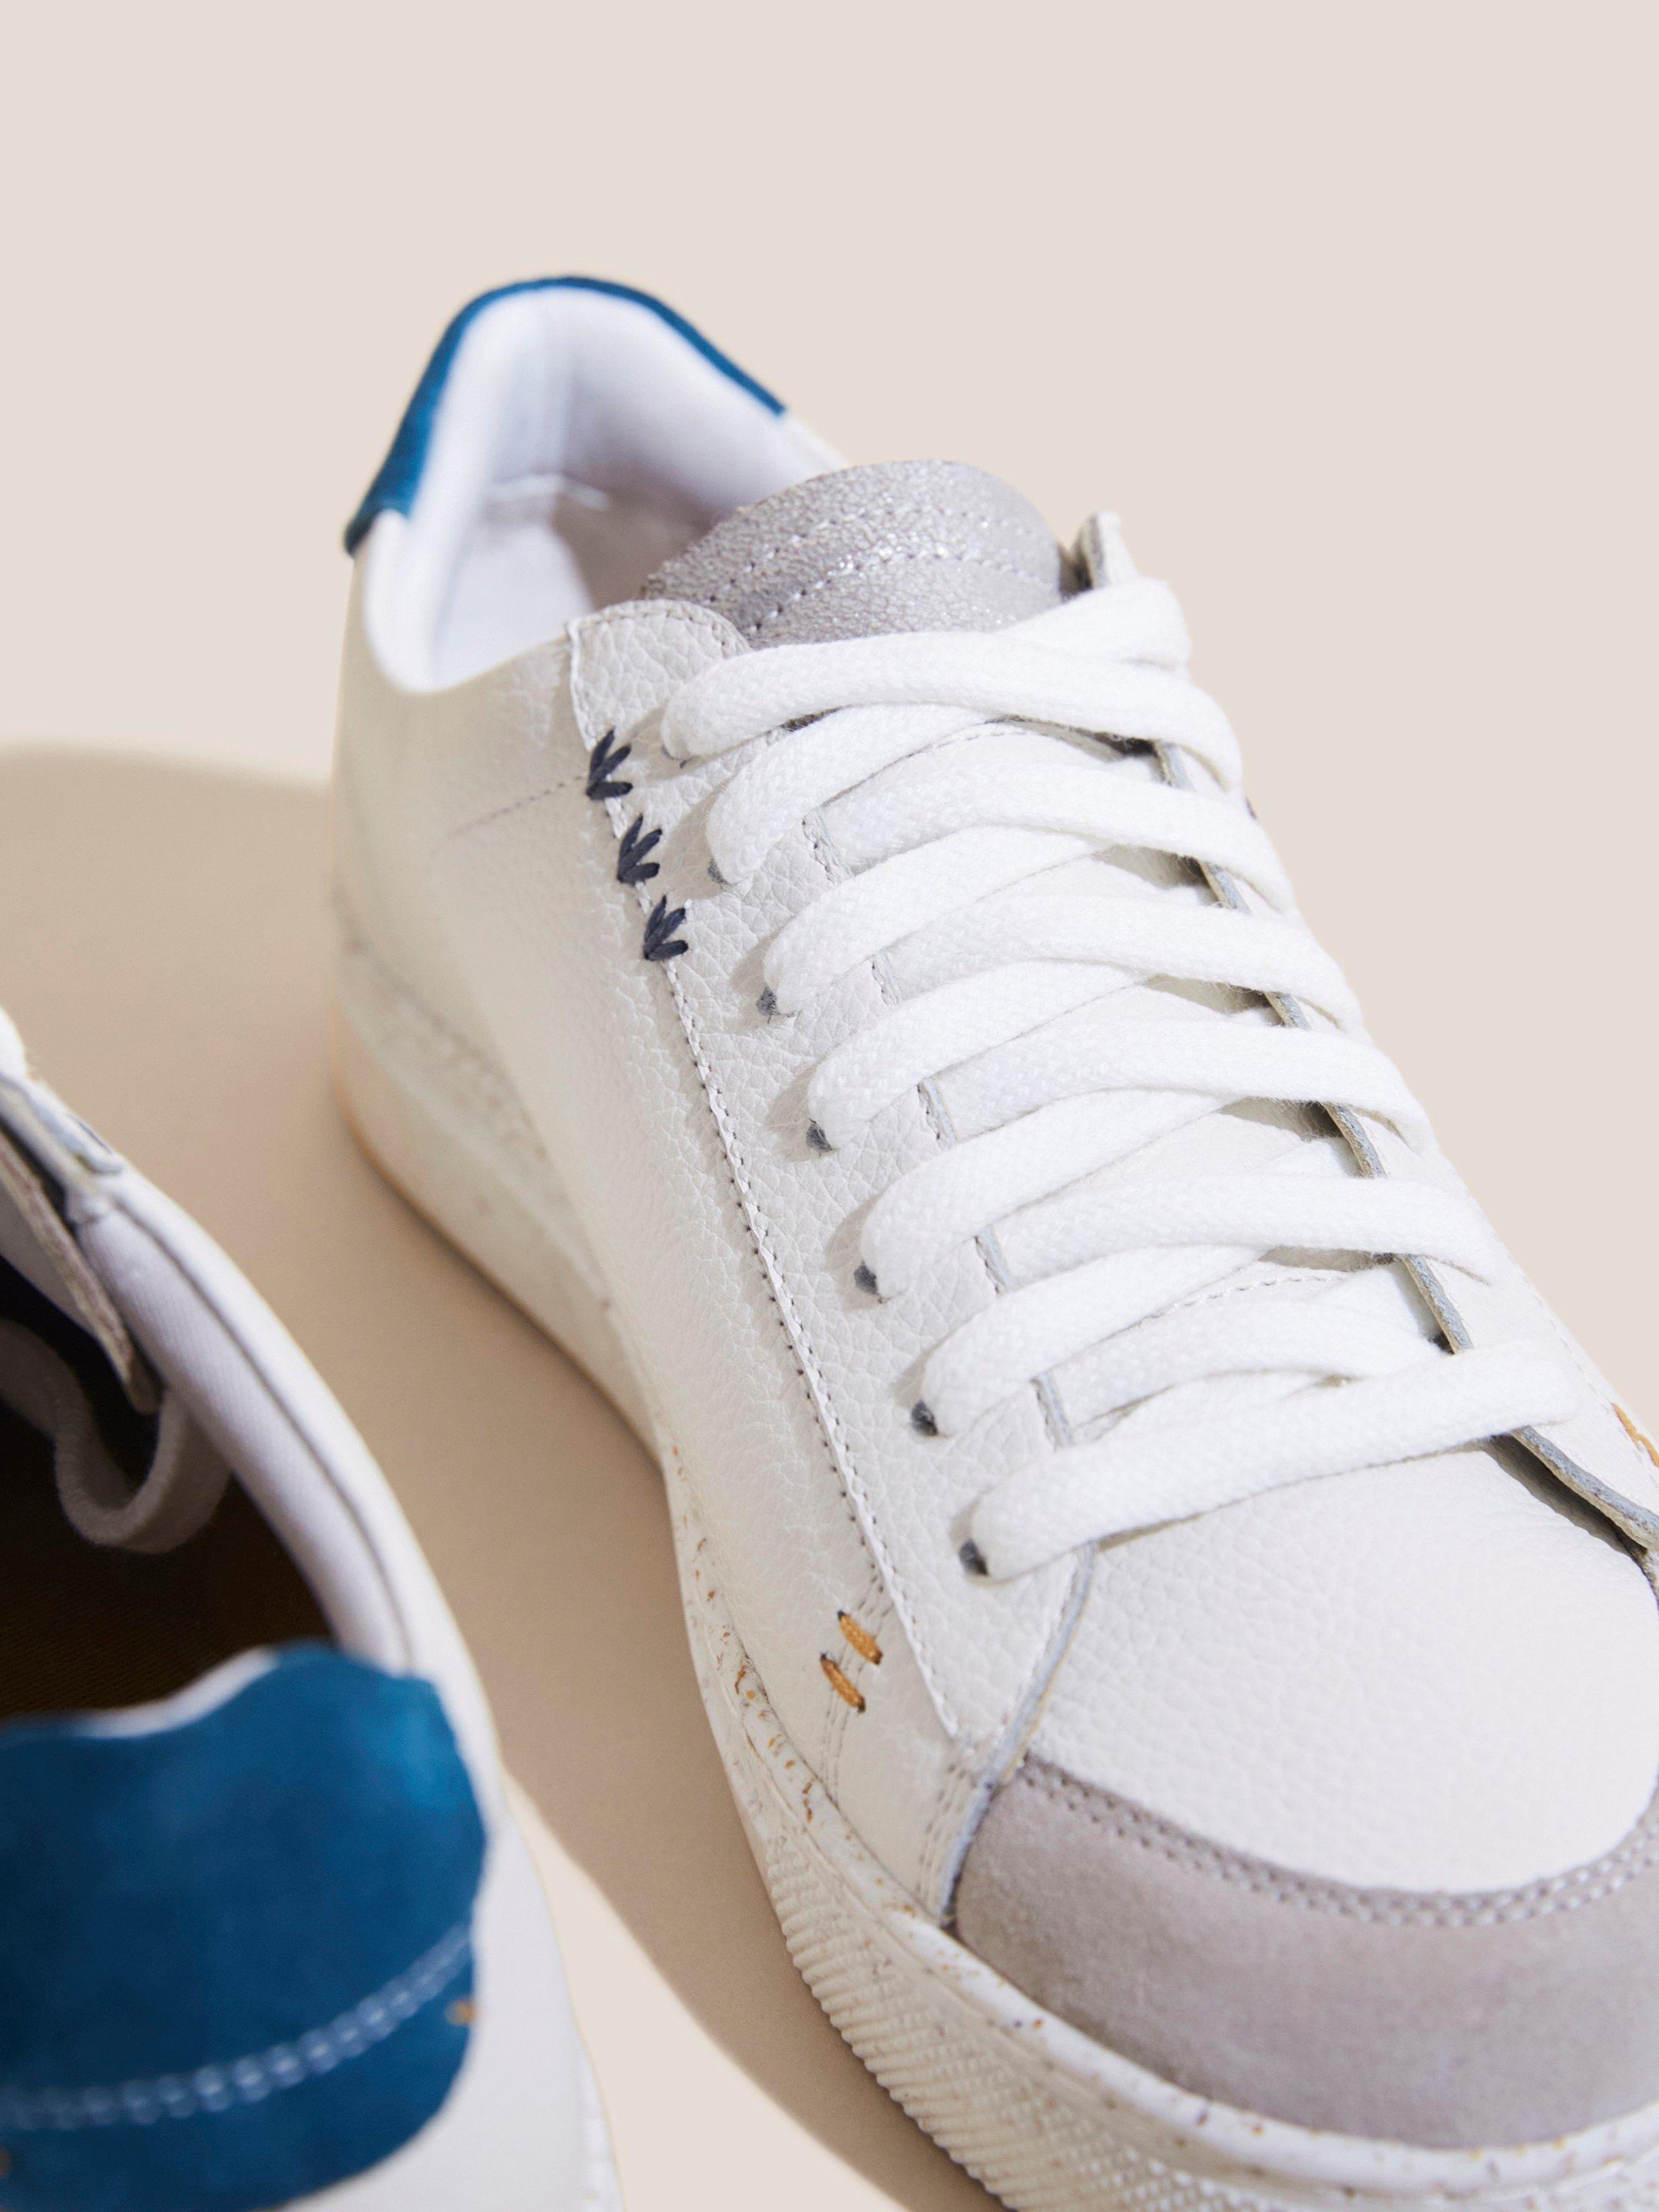 Toni Leather Trainer in WHITE MLT - FLAT DETAIL